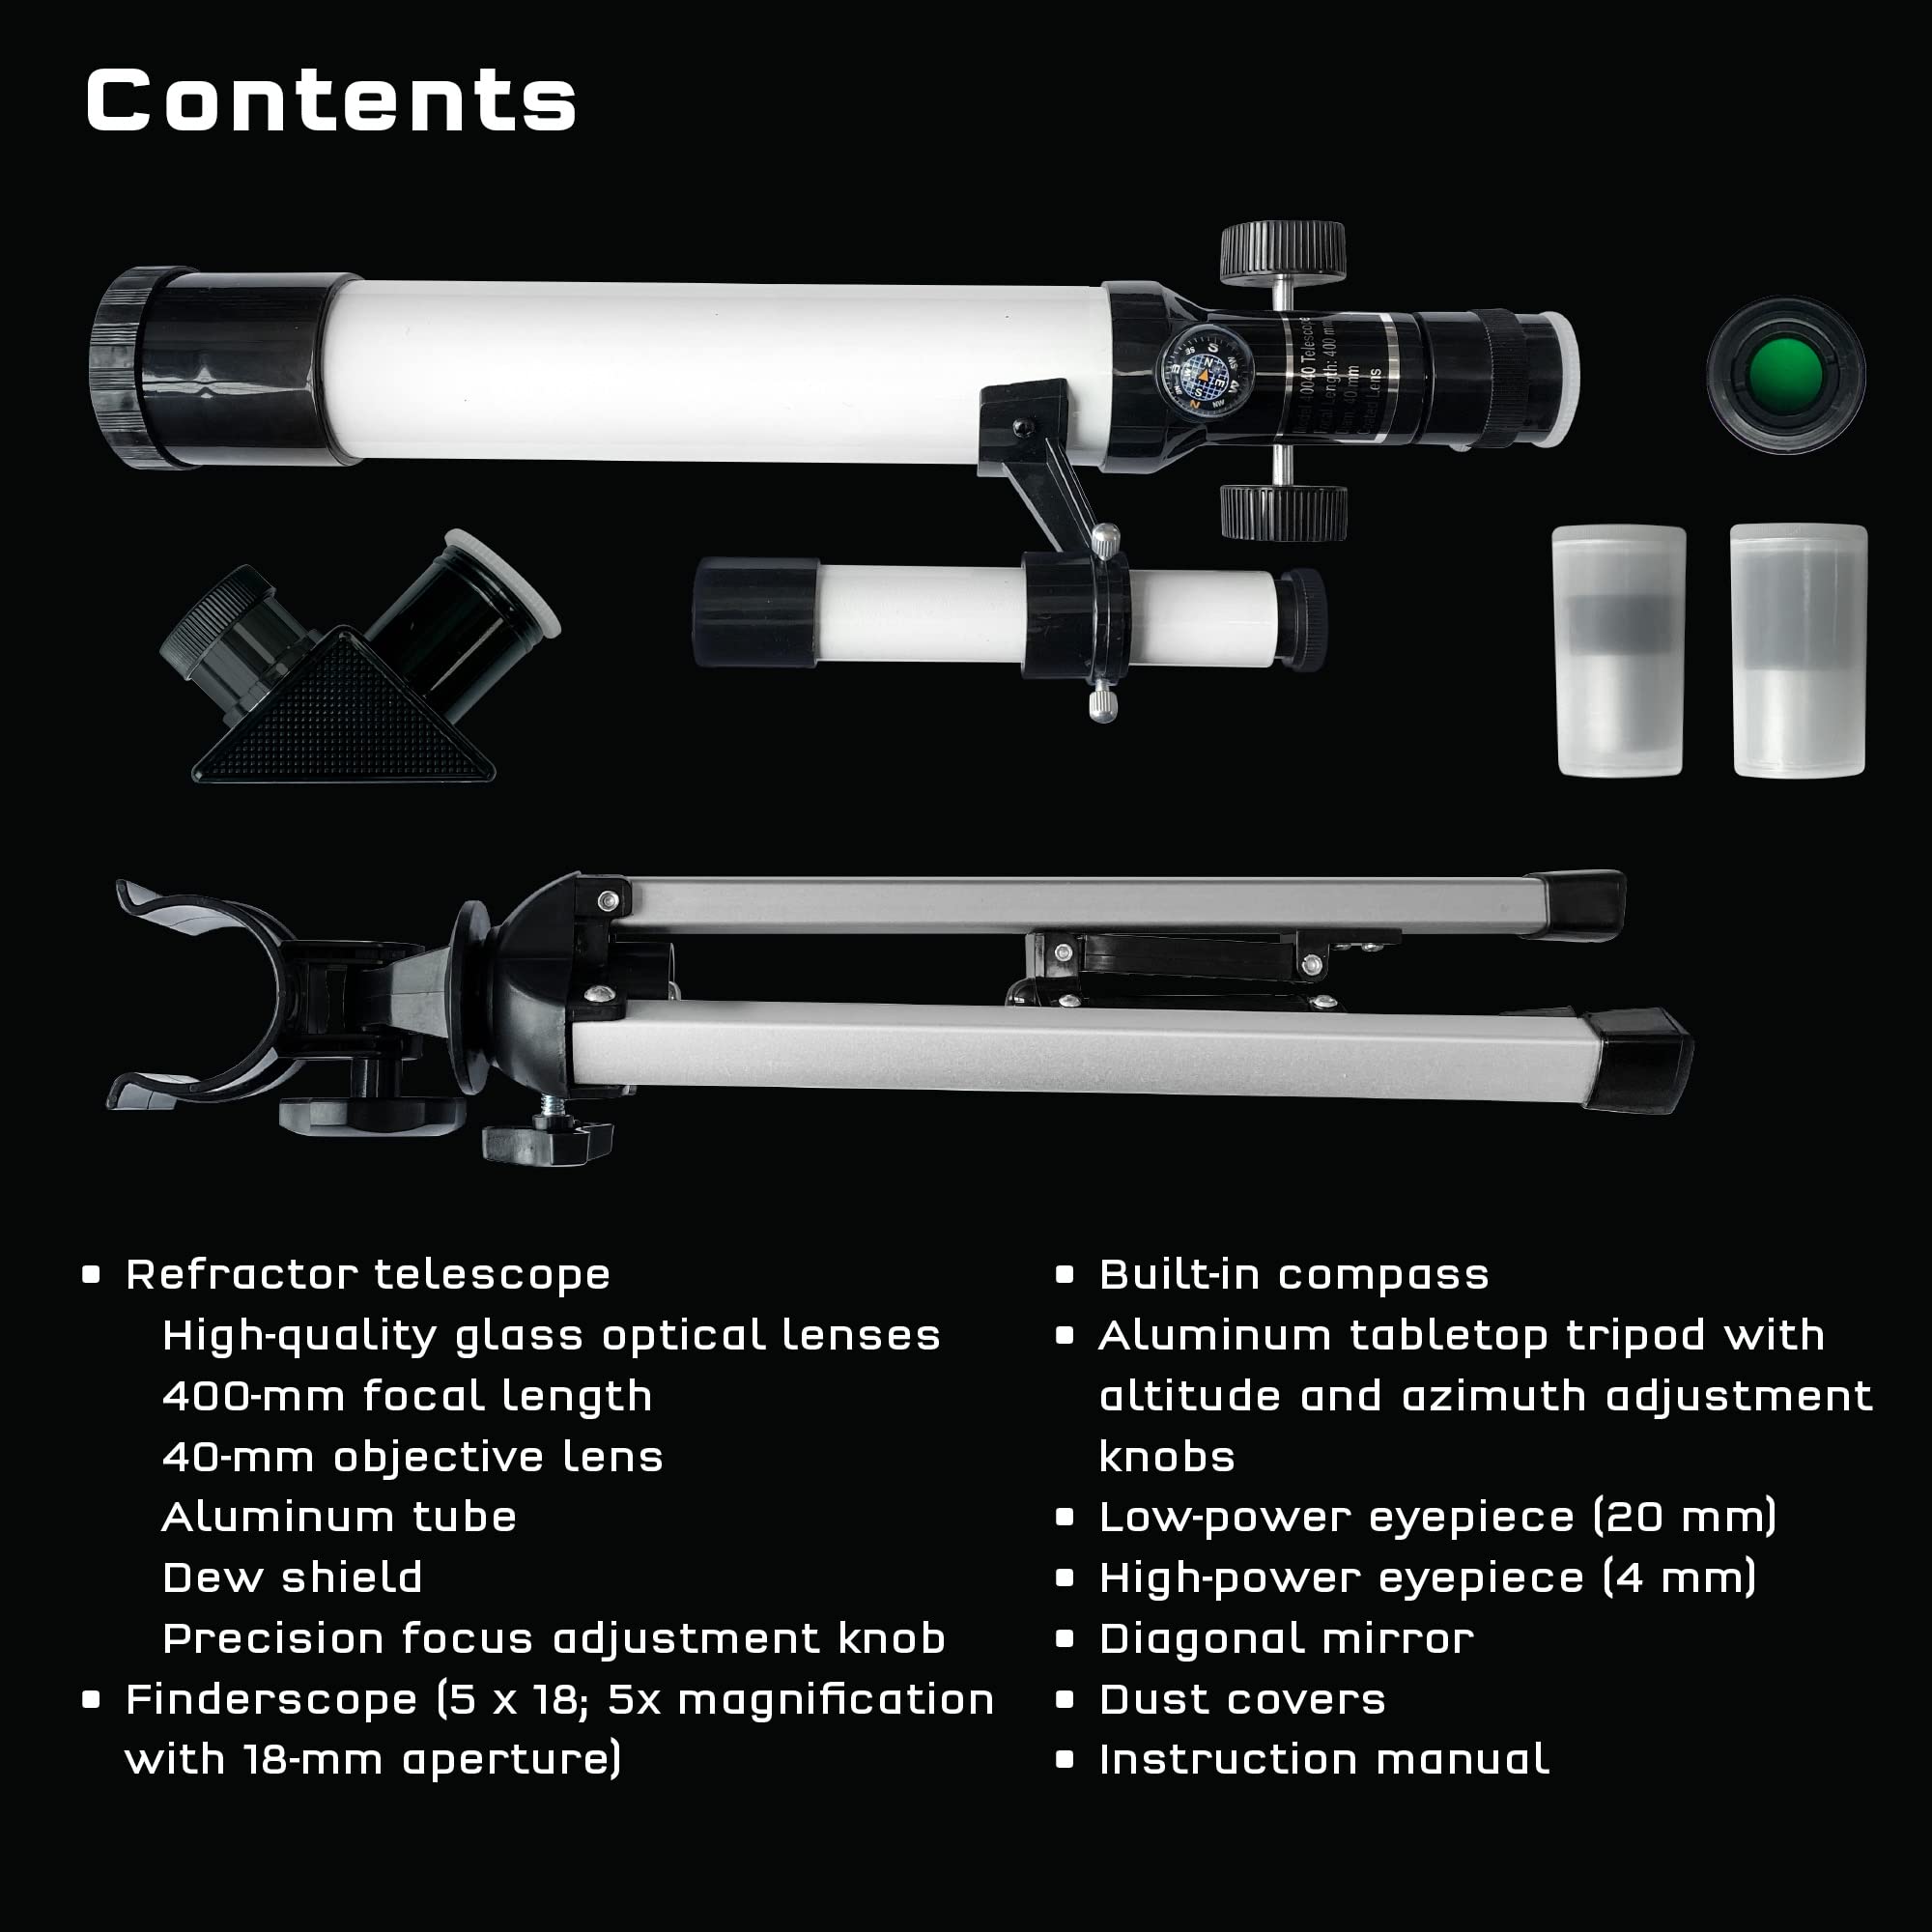 The Thames & Kosmos Telescope Essential STEM Tool | Entry-Level Refractor Telescope with 100x Magnification & Built-in Compass | Classic Scientific Device for Astronomical & Terrestrial Observations